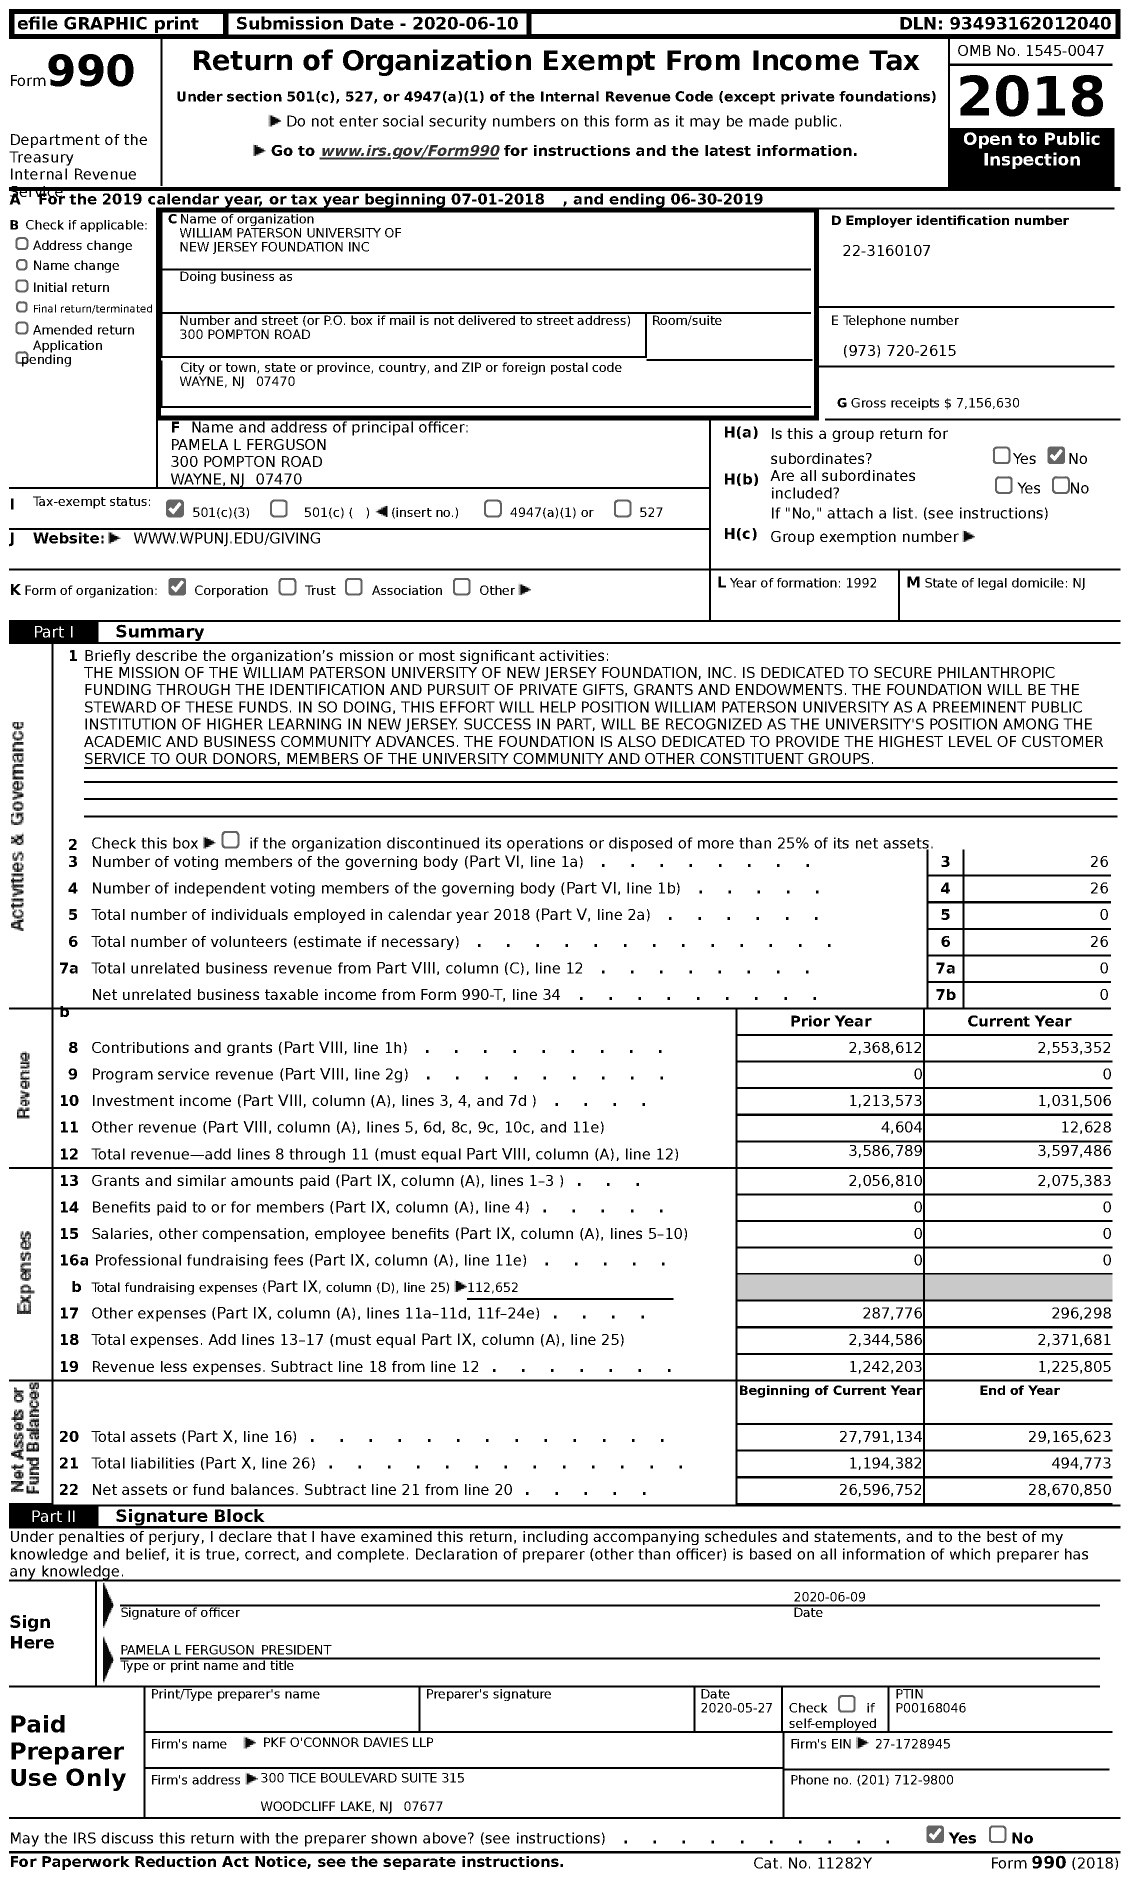 Image of first page of 2018 Form 990 for The William Paterson University of New Jersey (WPUNJ)